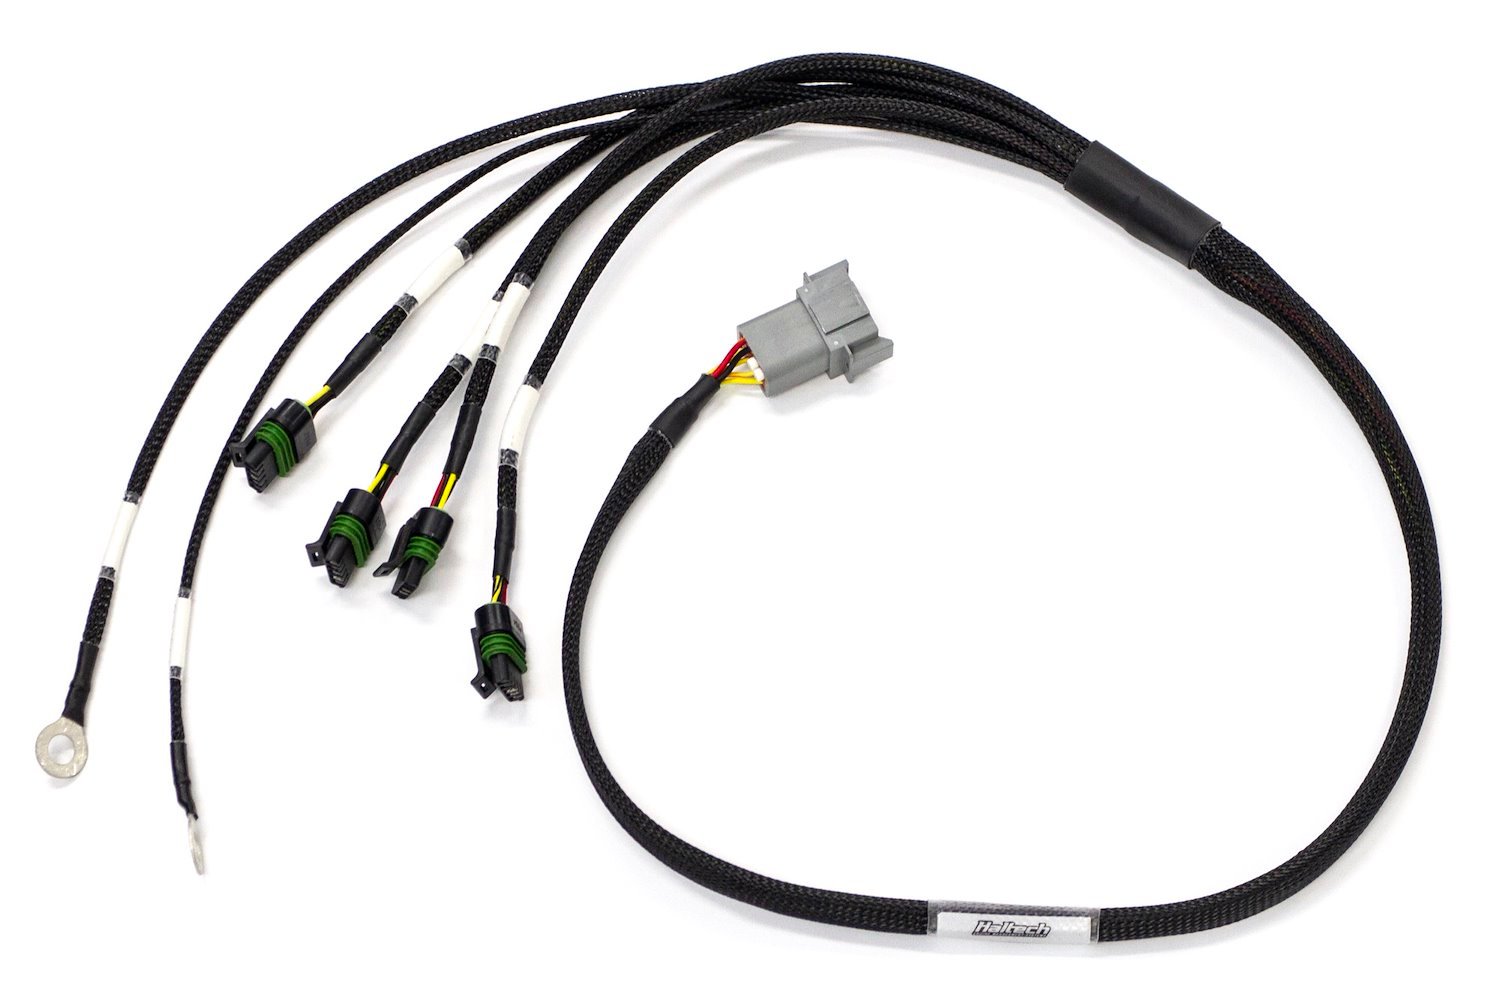 HT-130336 Elite 1000/1500 Maz 13B Term IGN-1A Ign Harness Only No Sub ha